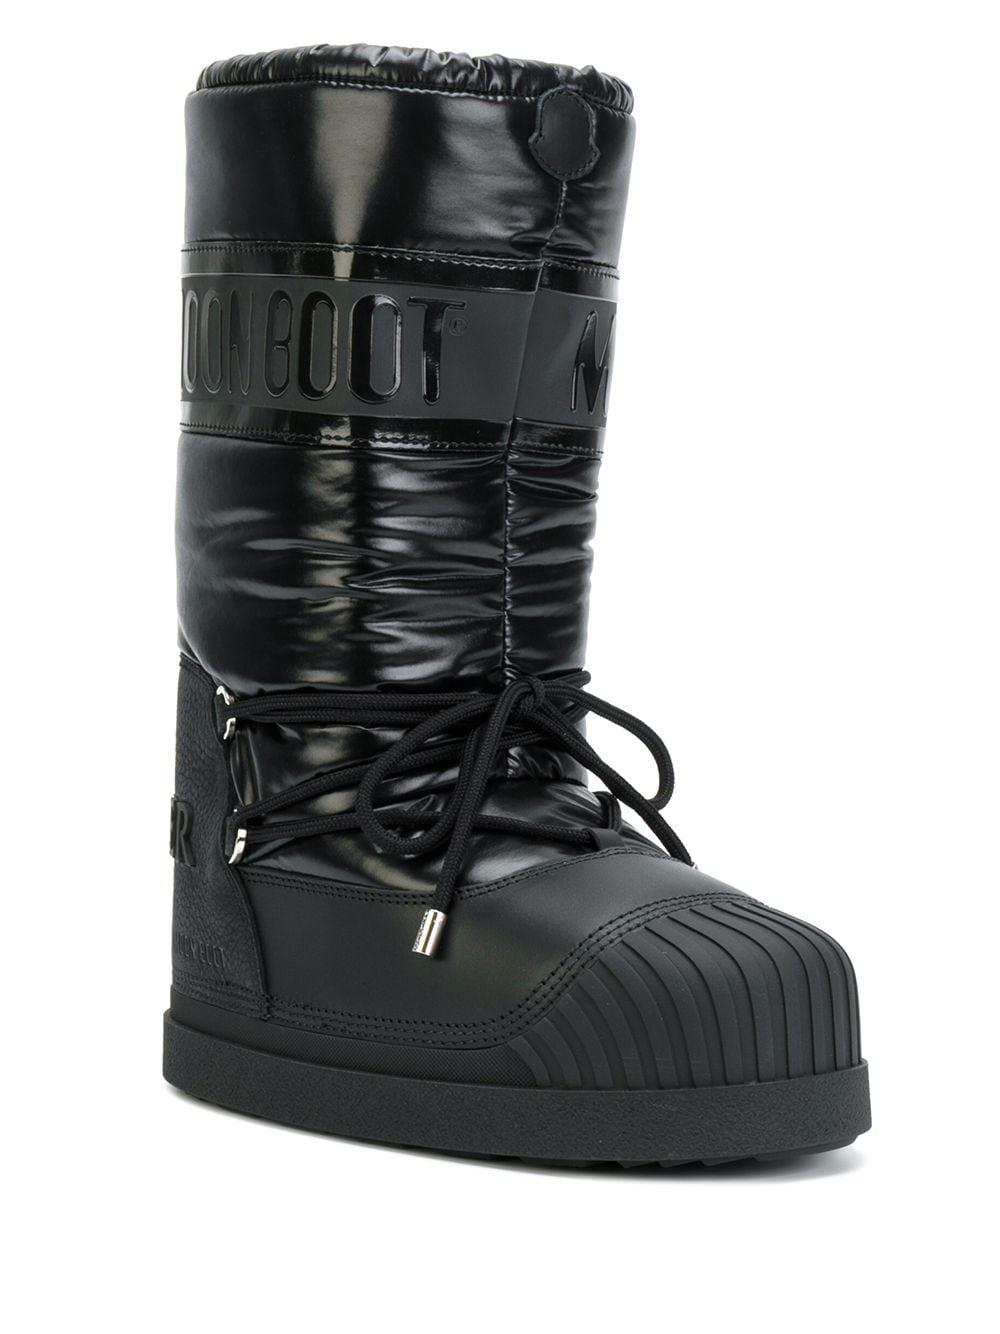 Moncler Venus Moon Boots in Black - Lyst